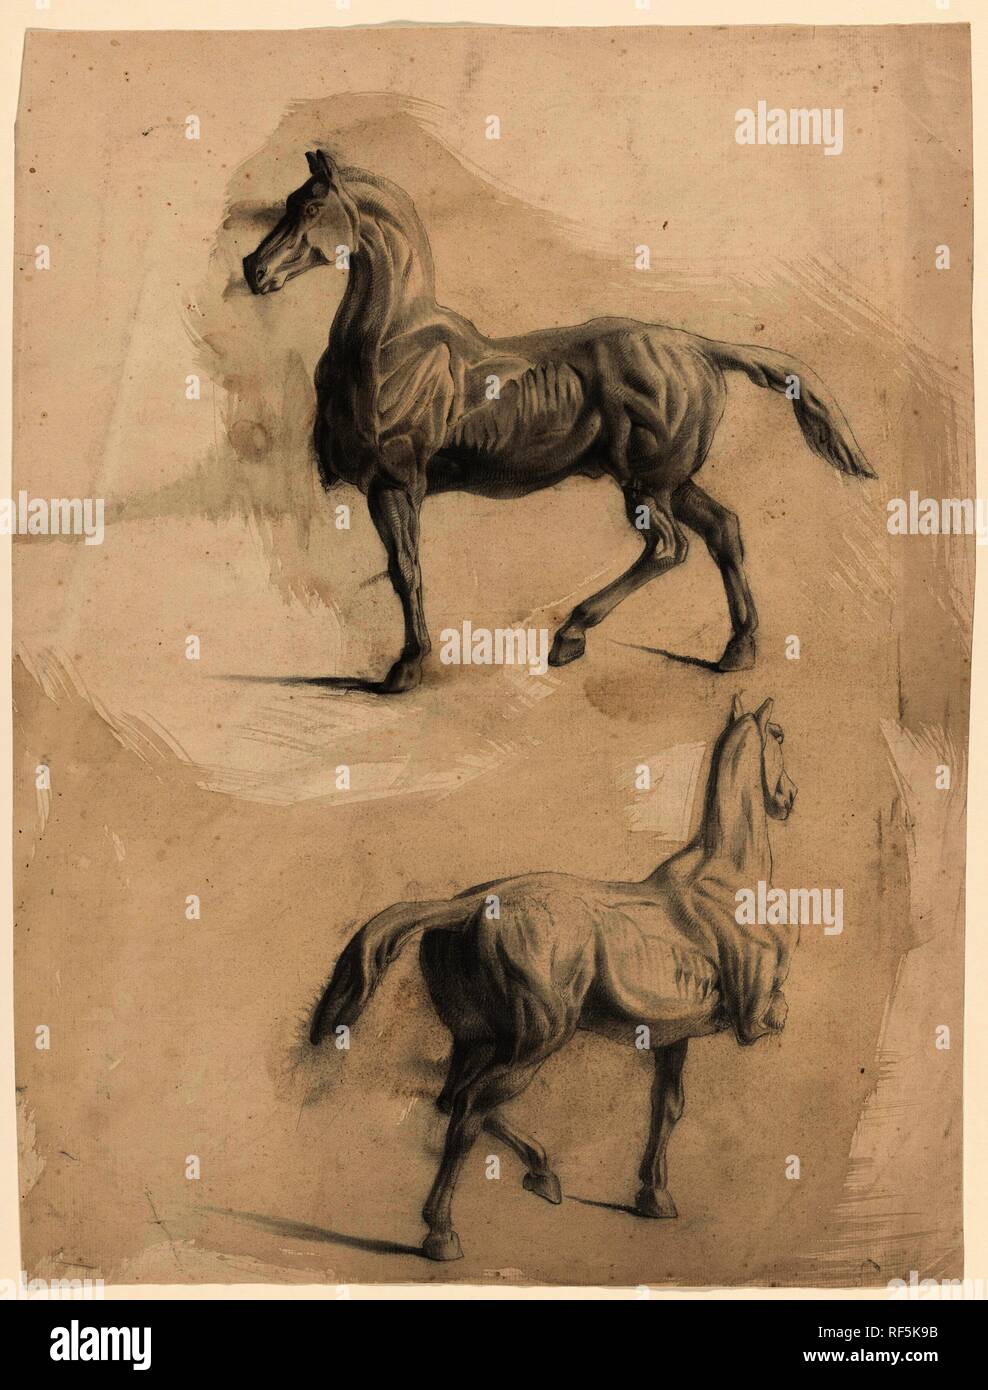 Two anatomy studies of a horse. Draughtsman: Johannes Tavenraat. Dating: 1819 - 1881. Measurements: h 530 mm × w 402 mm. Museum: Rijksmuseum, Amsterdam. Stock Photo